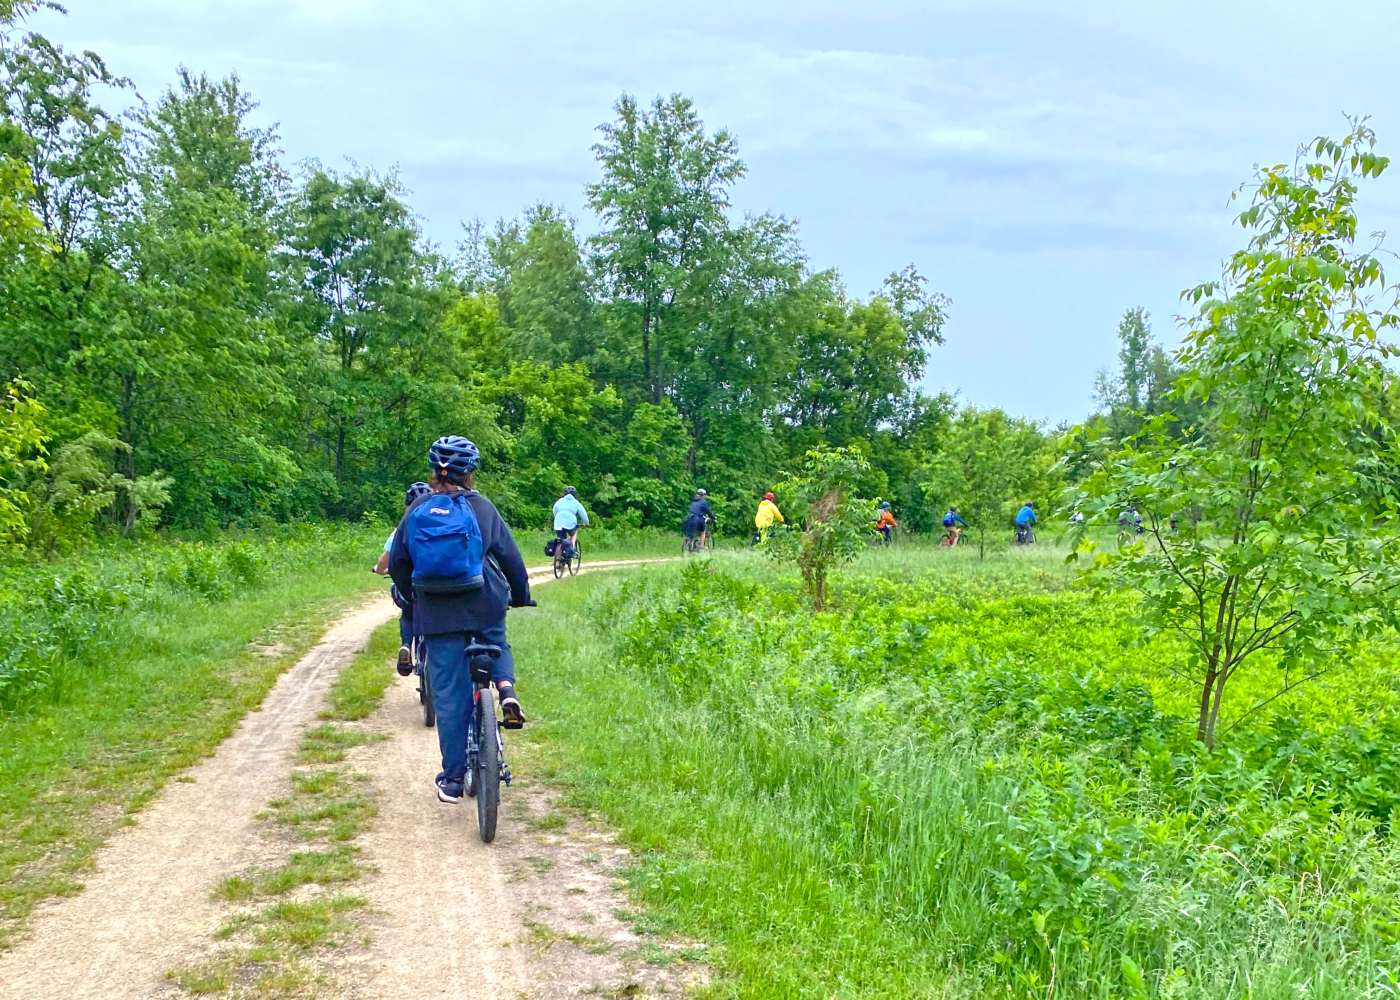 A group of students bicycling on a dirt path through a lush green meadow